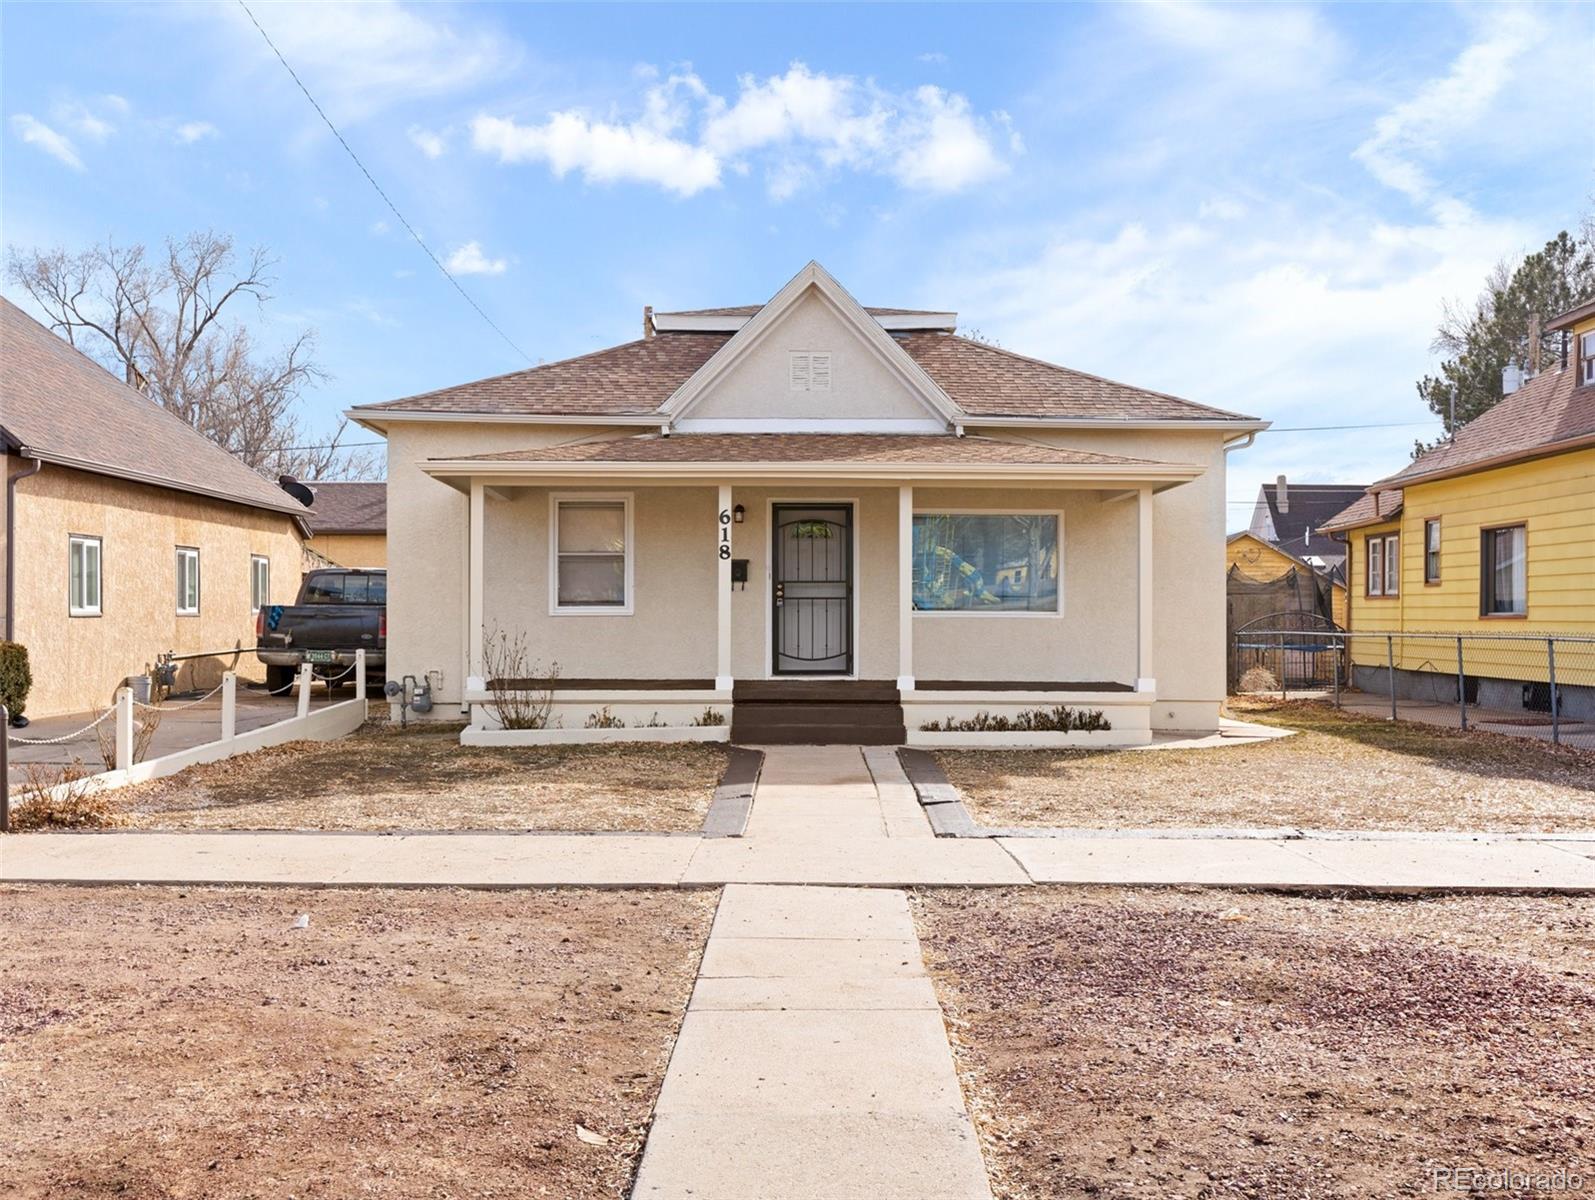 618 e 6th street, pueblo sold home. Closed on 2024-05-17 for $252,000.